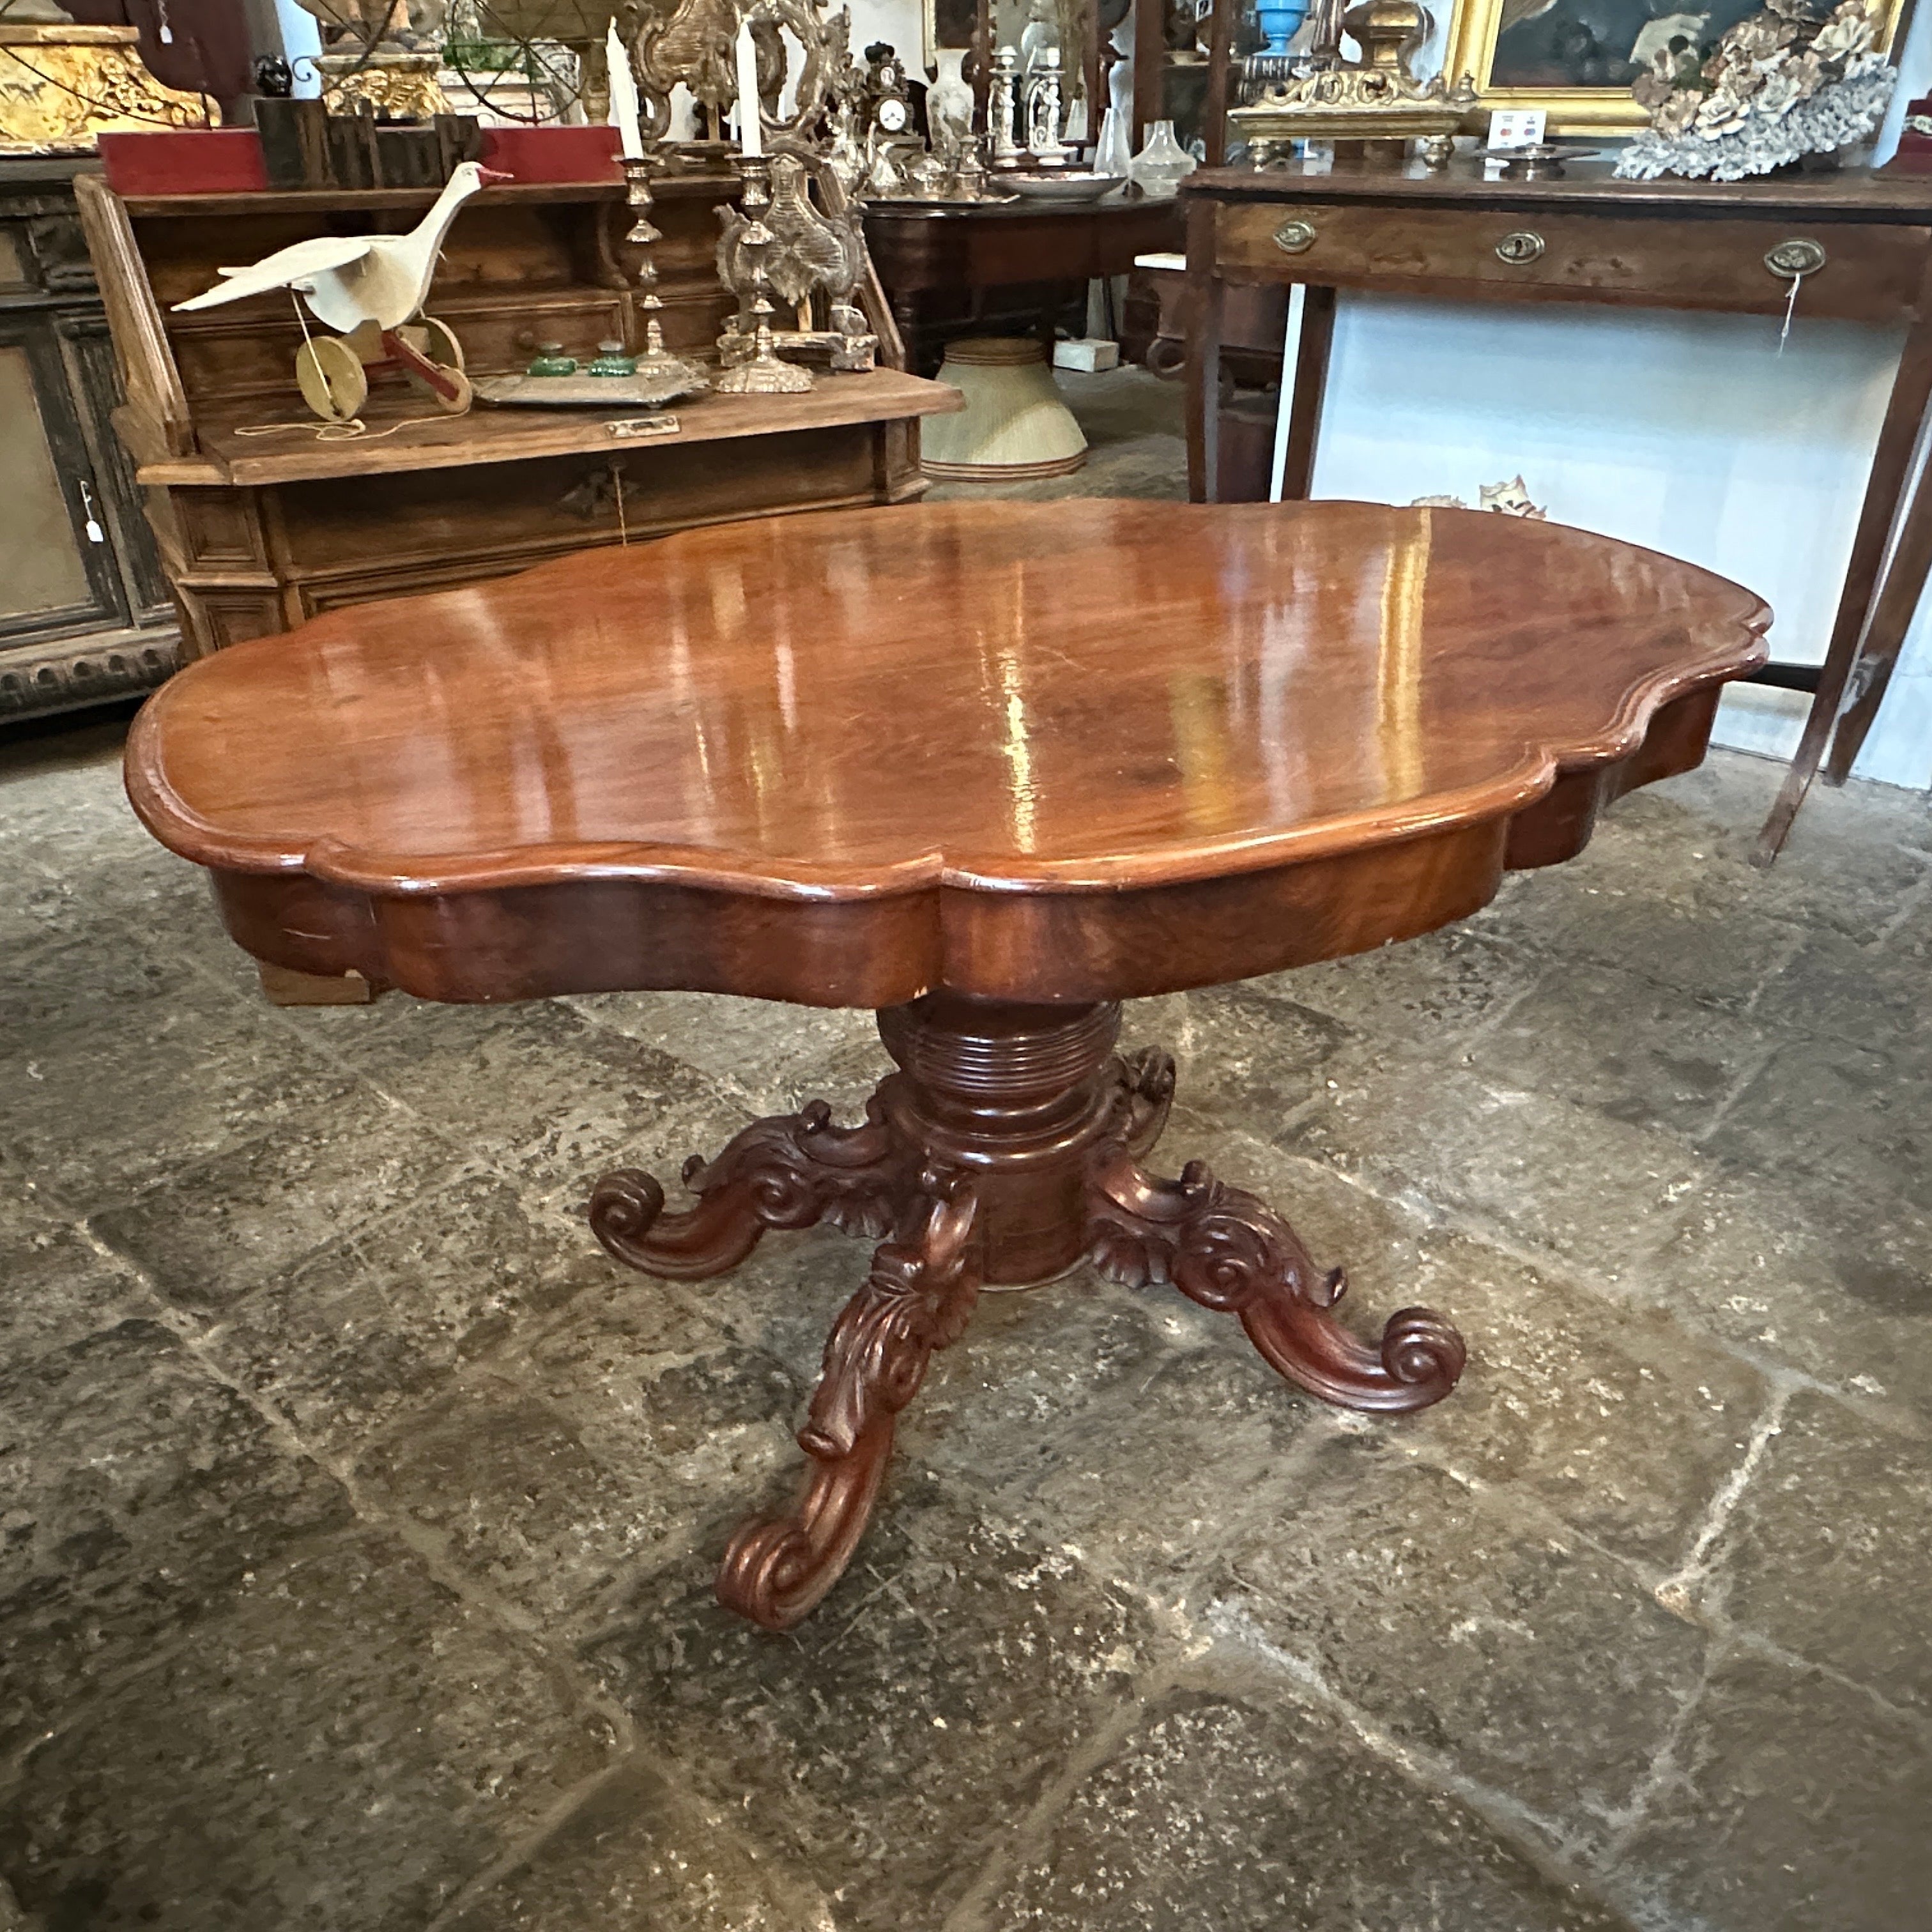  A side table crafted from mahogany, a popular hardwood during the Louis Philippe era known for its rich, dark color and fine grain. The tabletop is designed to emulate a turtle shell shape, it's in good conditions overall considering use and